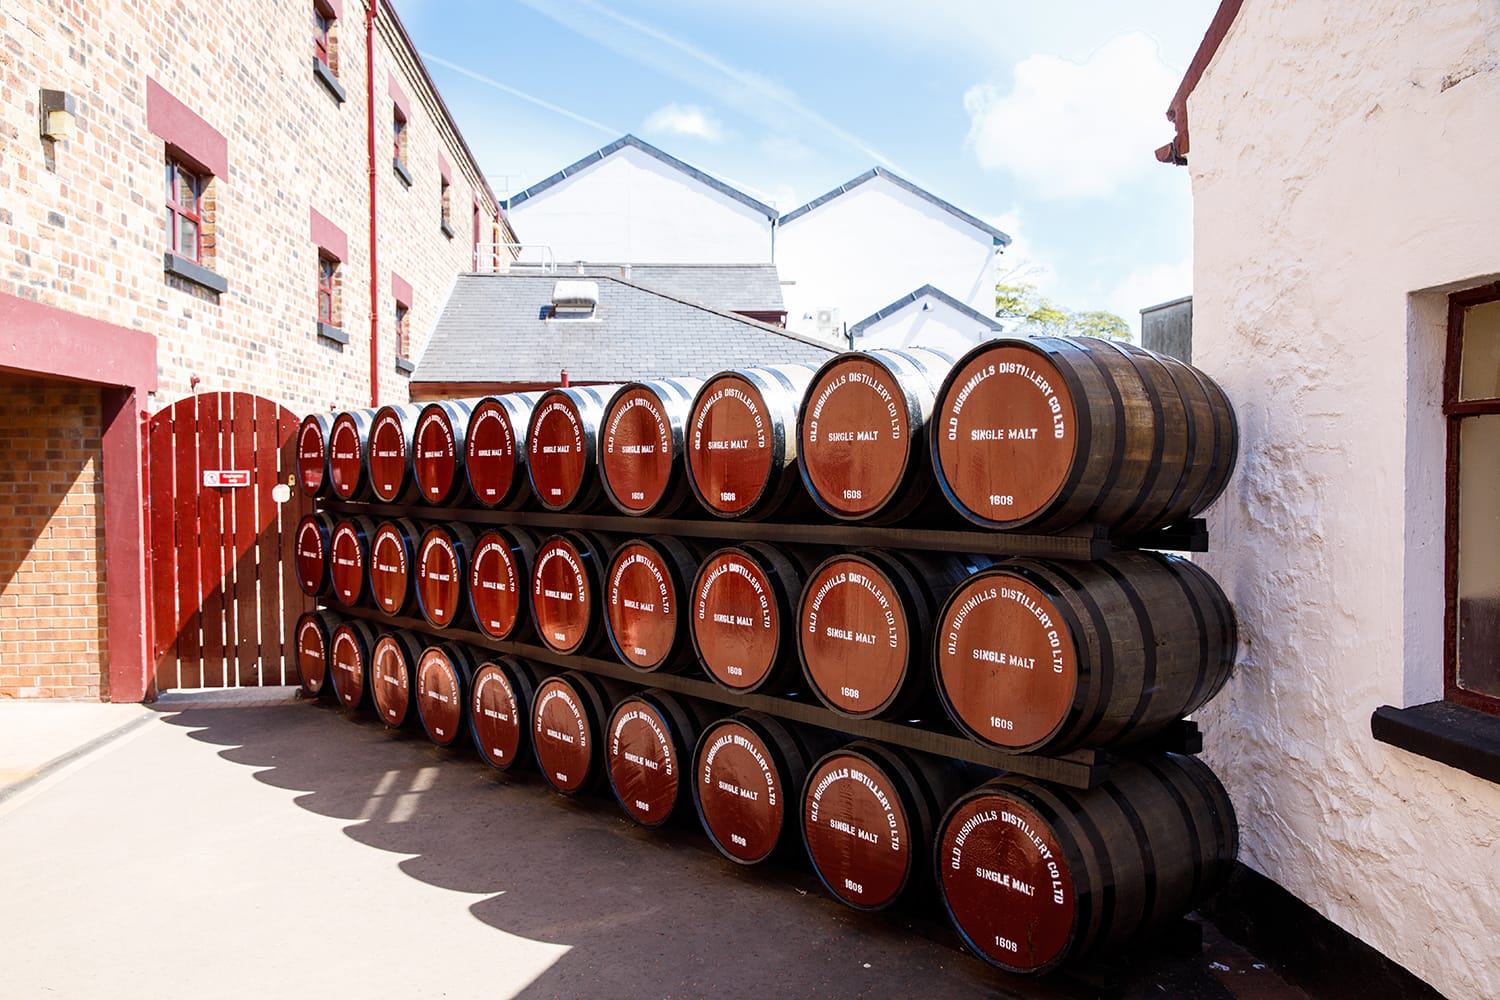 Buildings and exterior of Old Bushmills Distillery, County Antrim, Northern Ireland